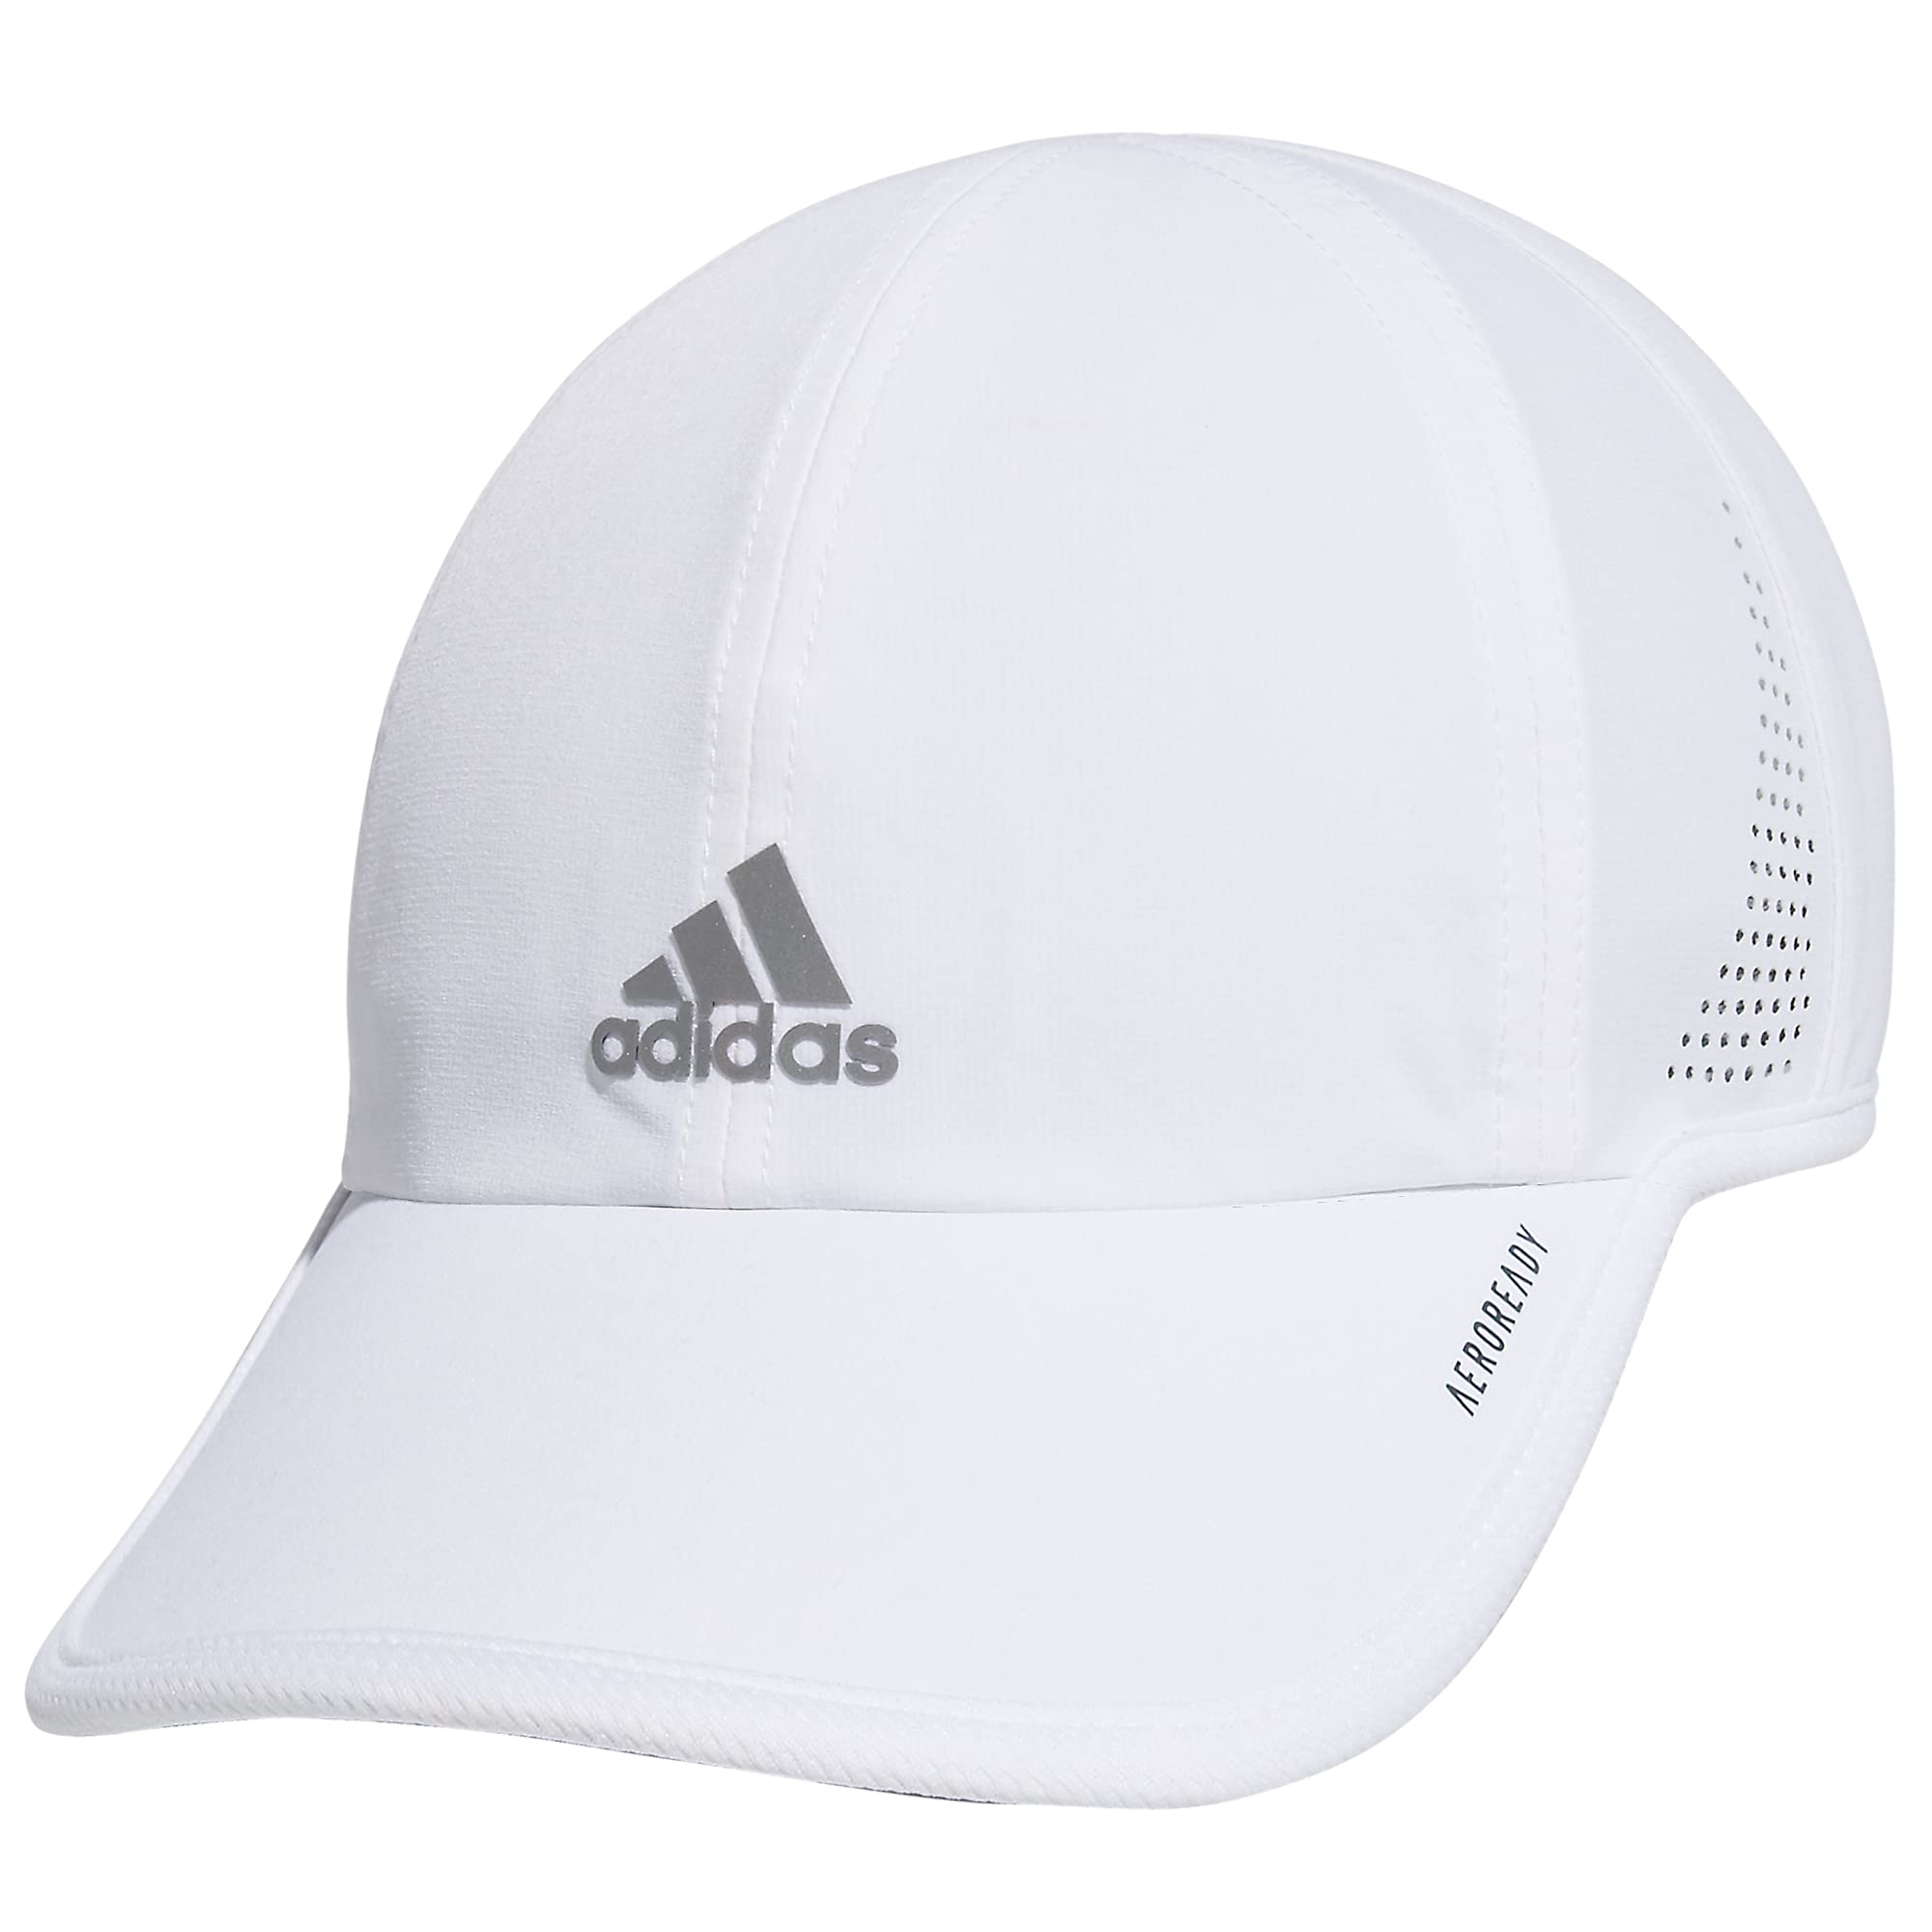 adidas Women's Superlite Relaxed Fit Performance Cap (White/Silver Reflective) $9.88 + Free Shipping w/ Prime or on $35+